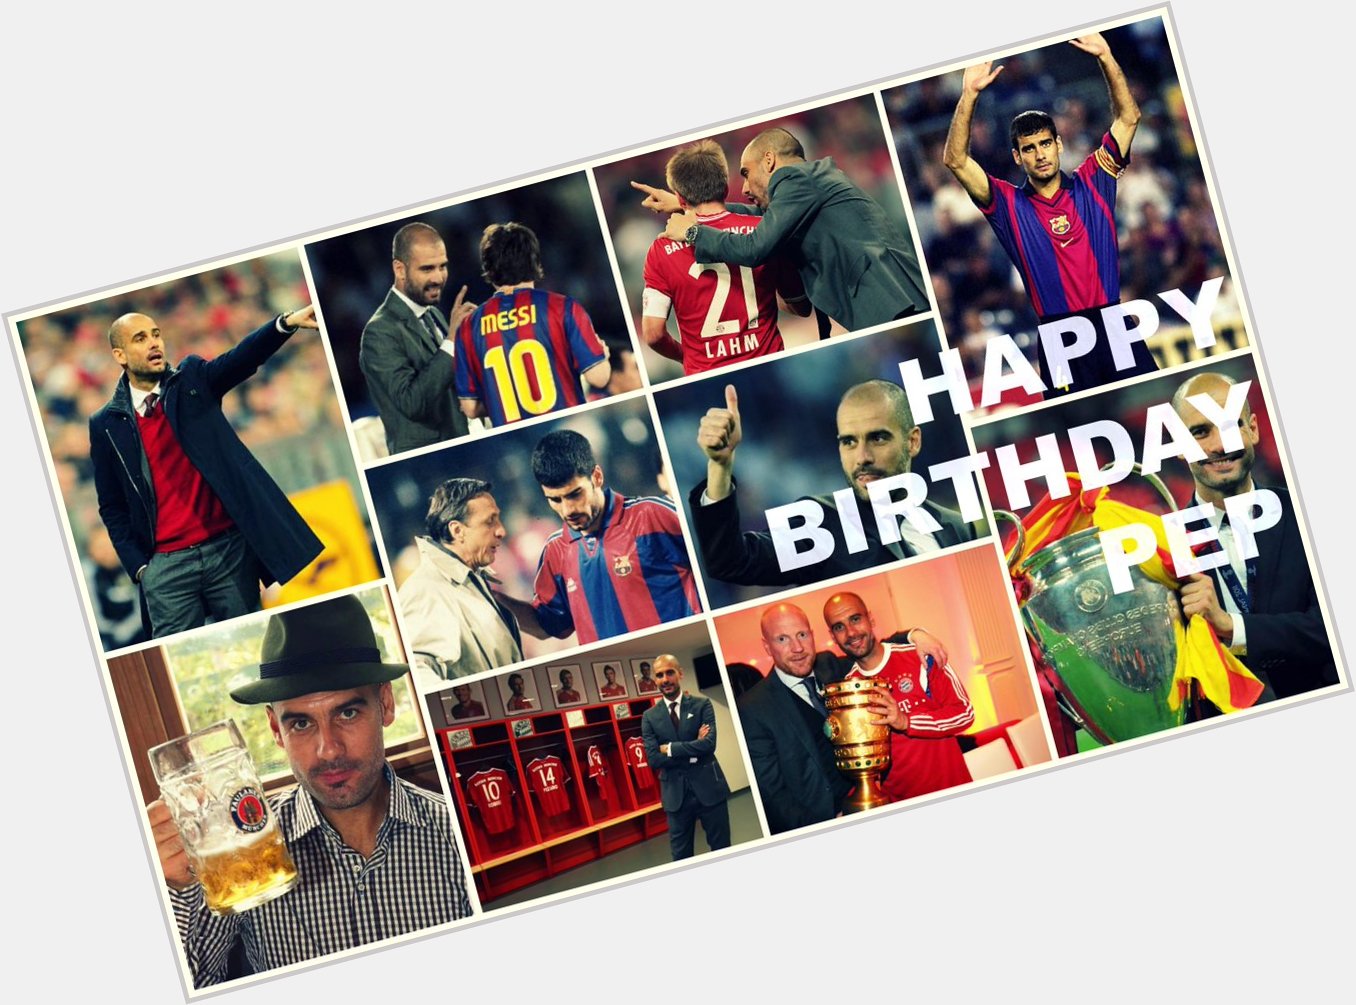 Happy Birthday to the greatest coach in the world, Pep Guardiola. Thankful to have an innovator like him in football 